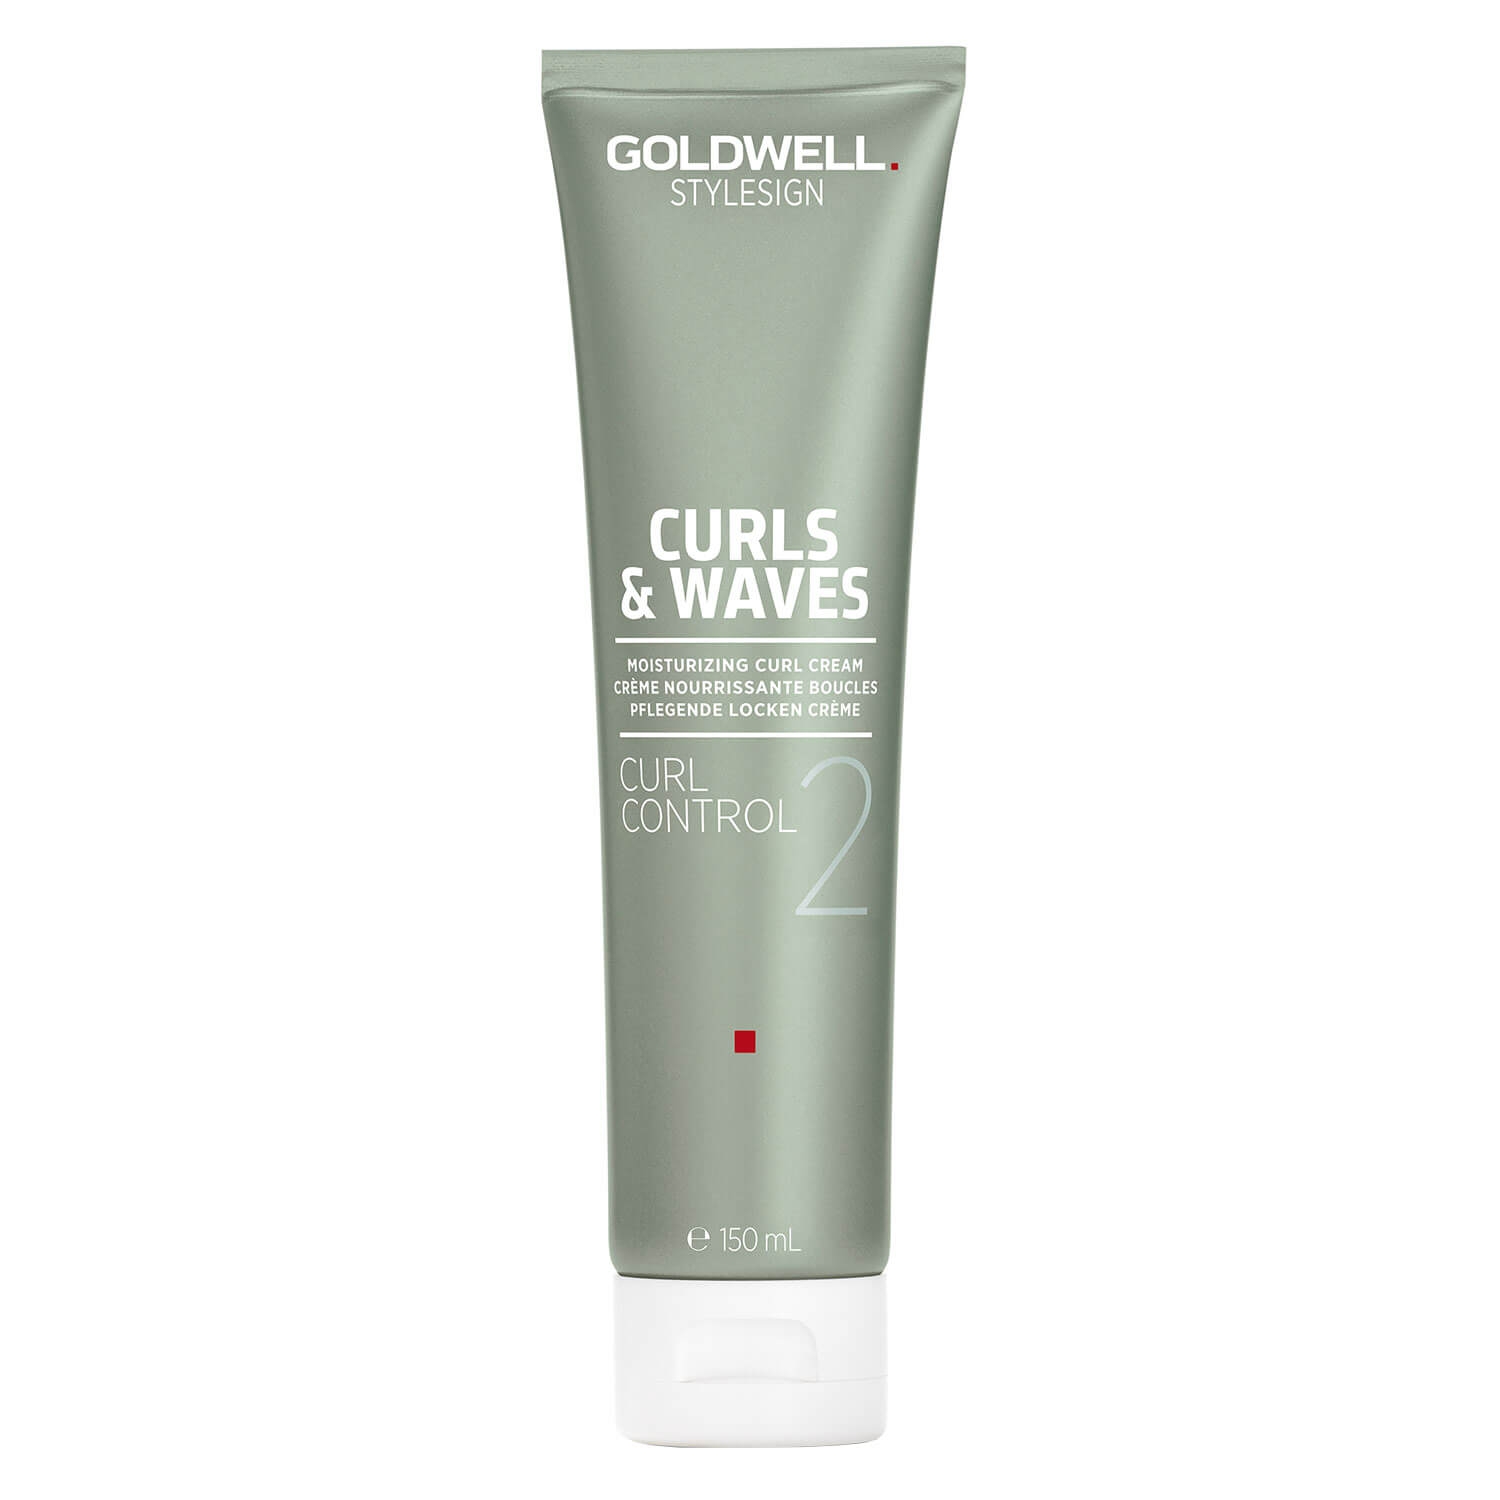 Product image from Curls & Waves Stylesign - Curl Control